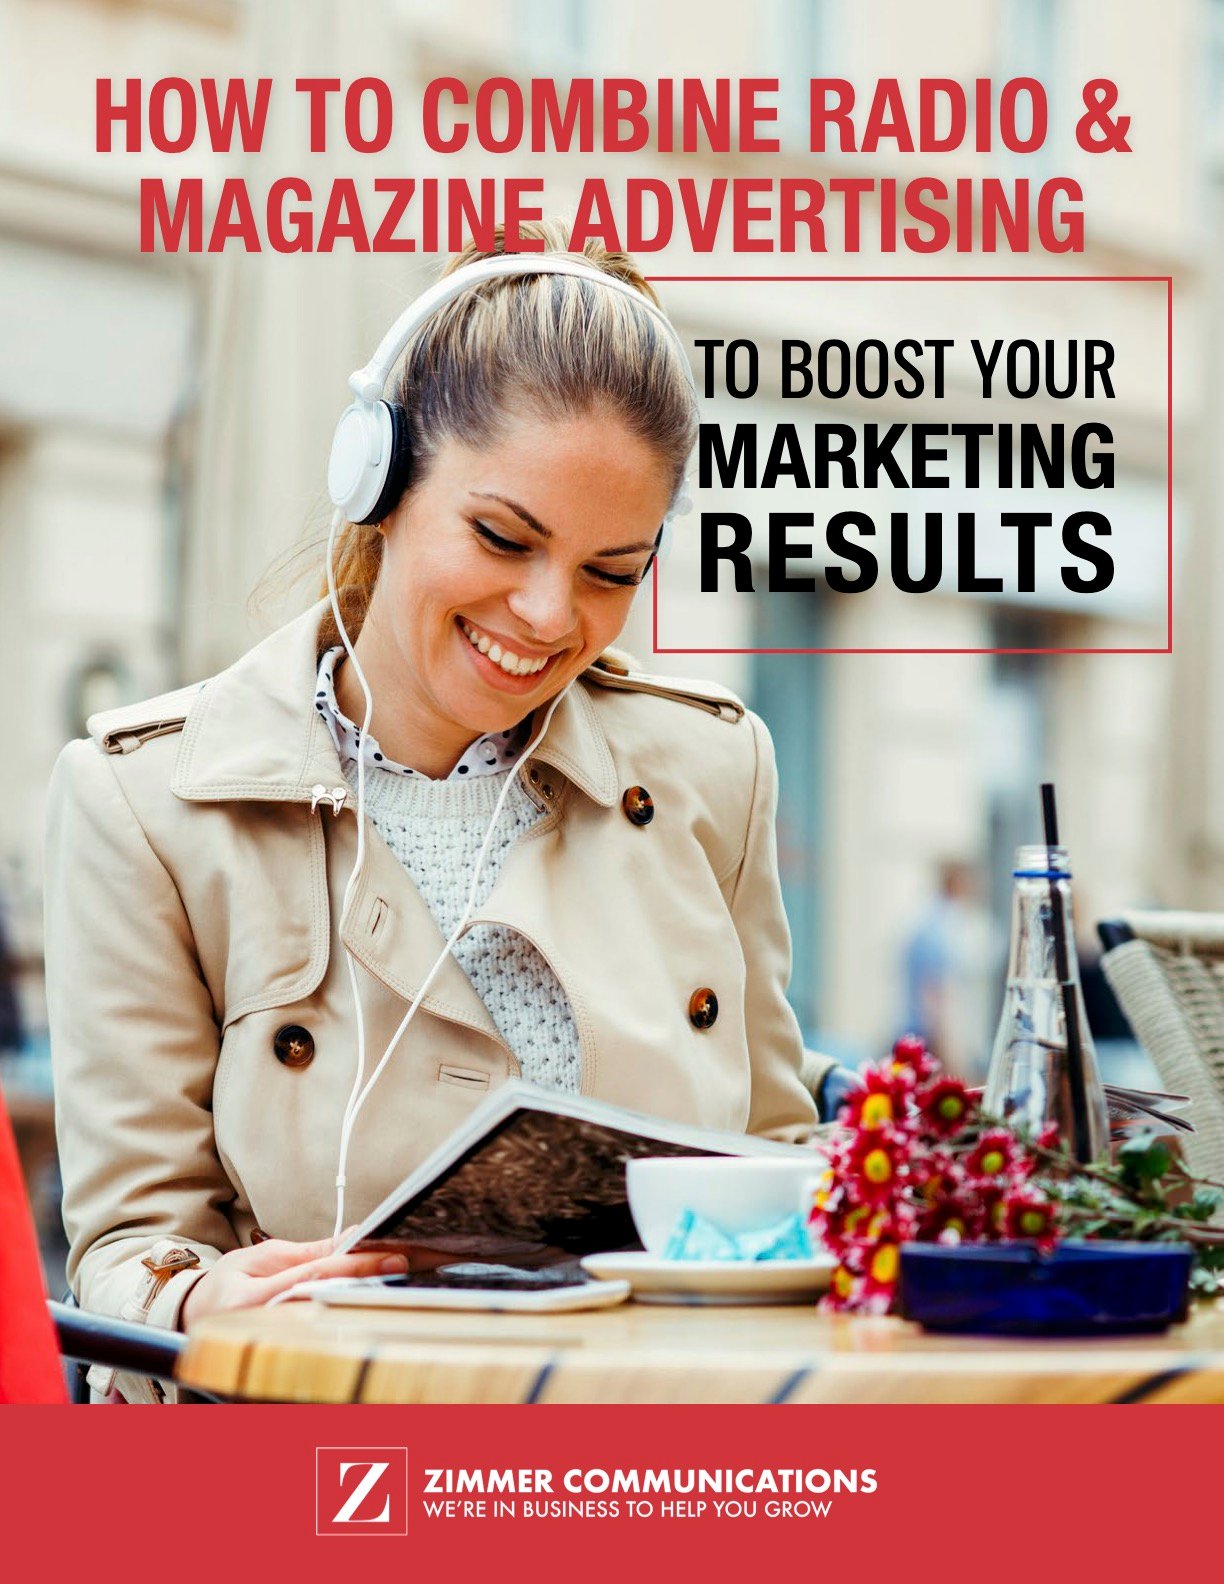 How to Combine Radio & Magazine Advertising to Boost Your Marketing Results